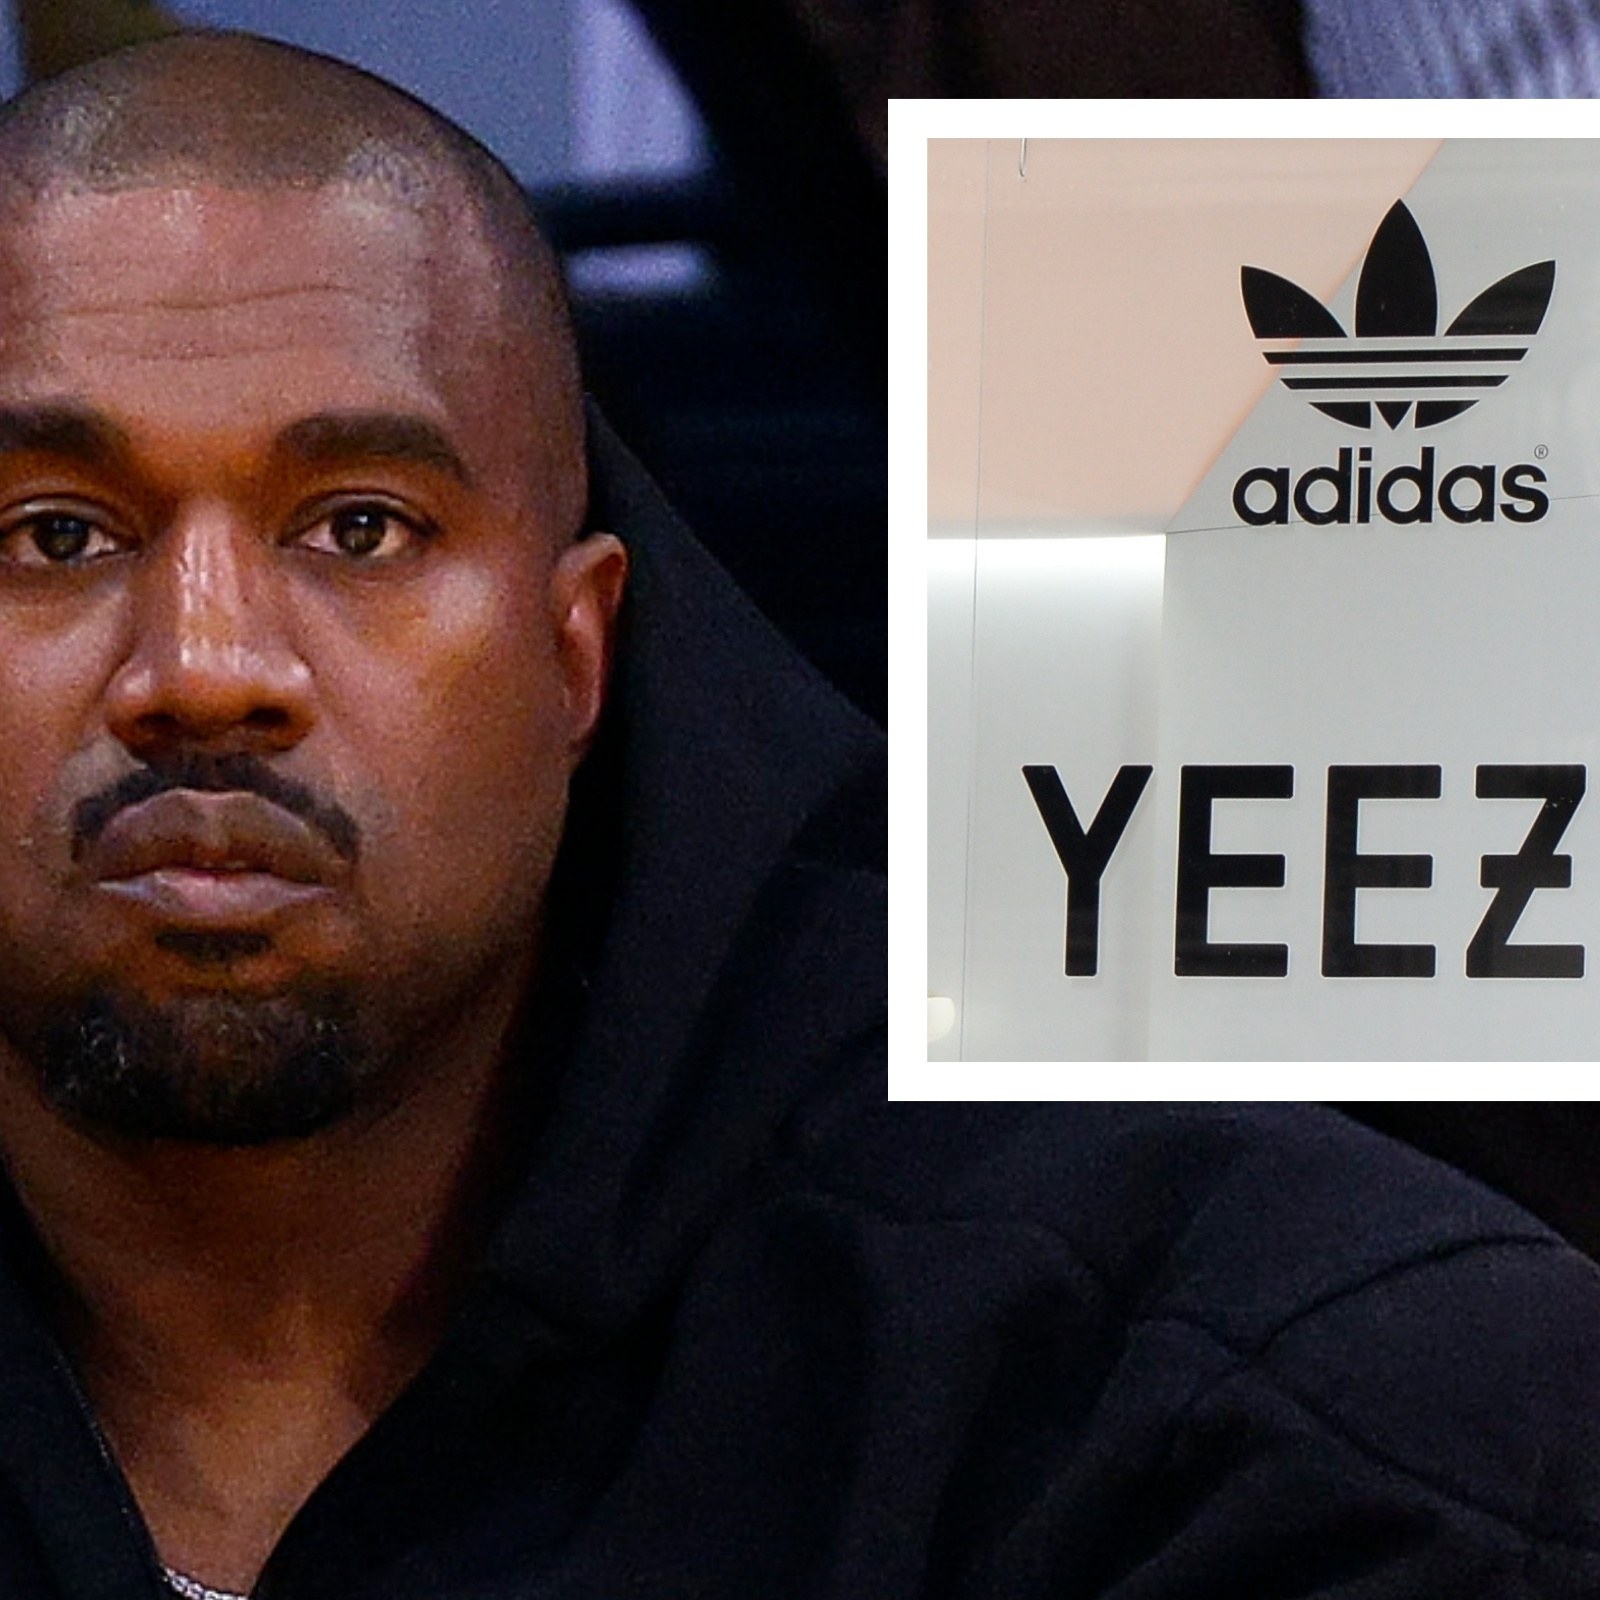 What's Next Kanye West's Brand as Adidas Copyright Continues